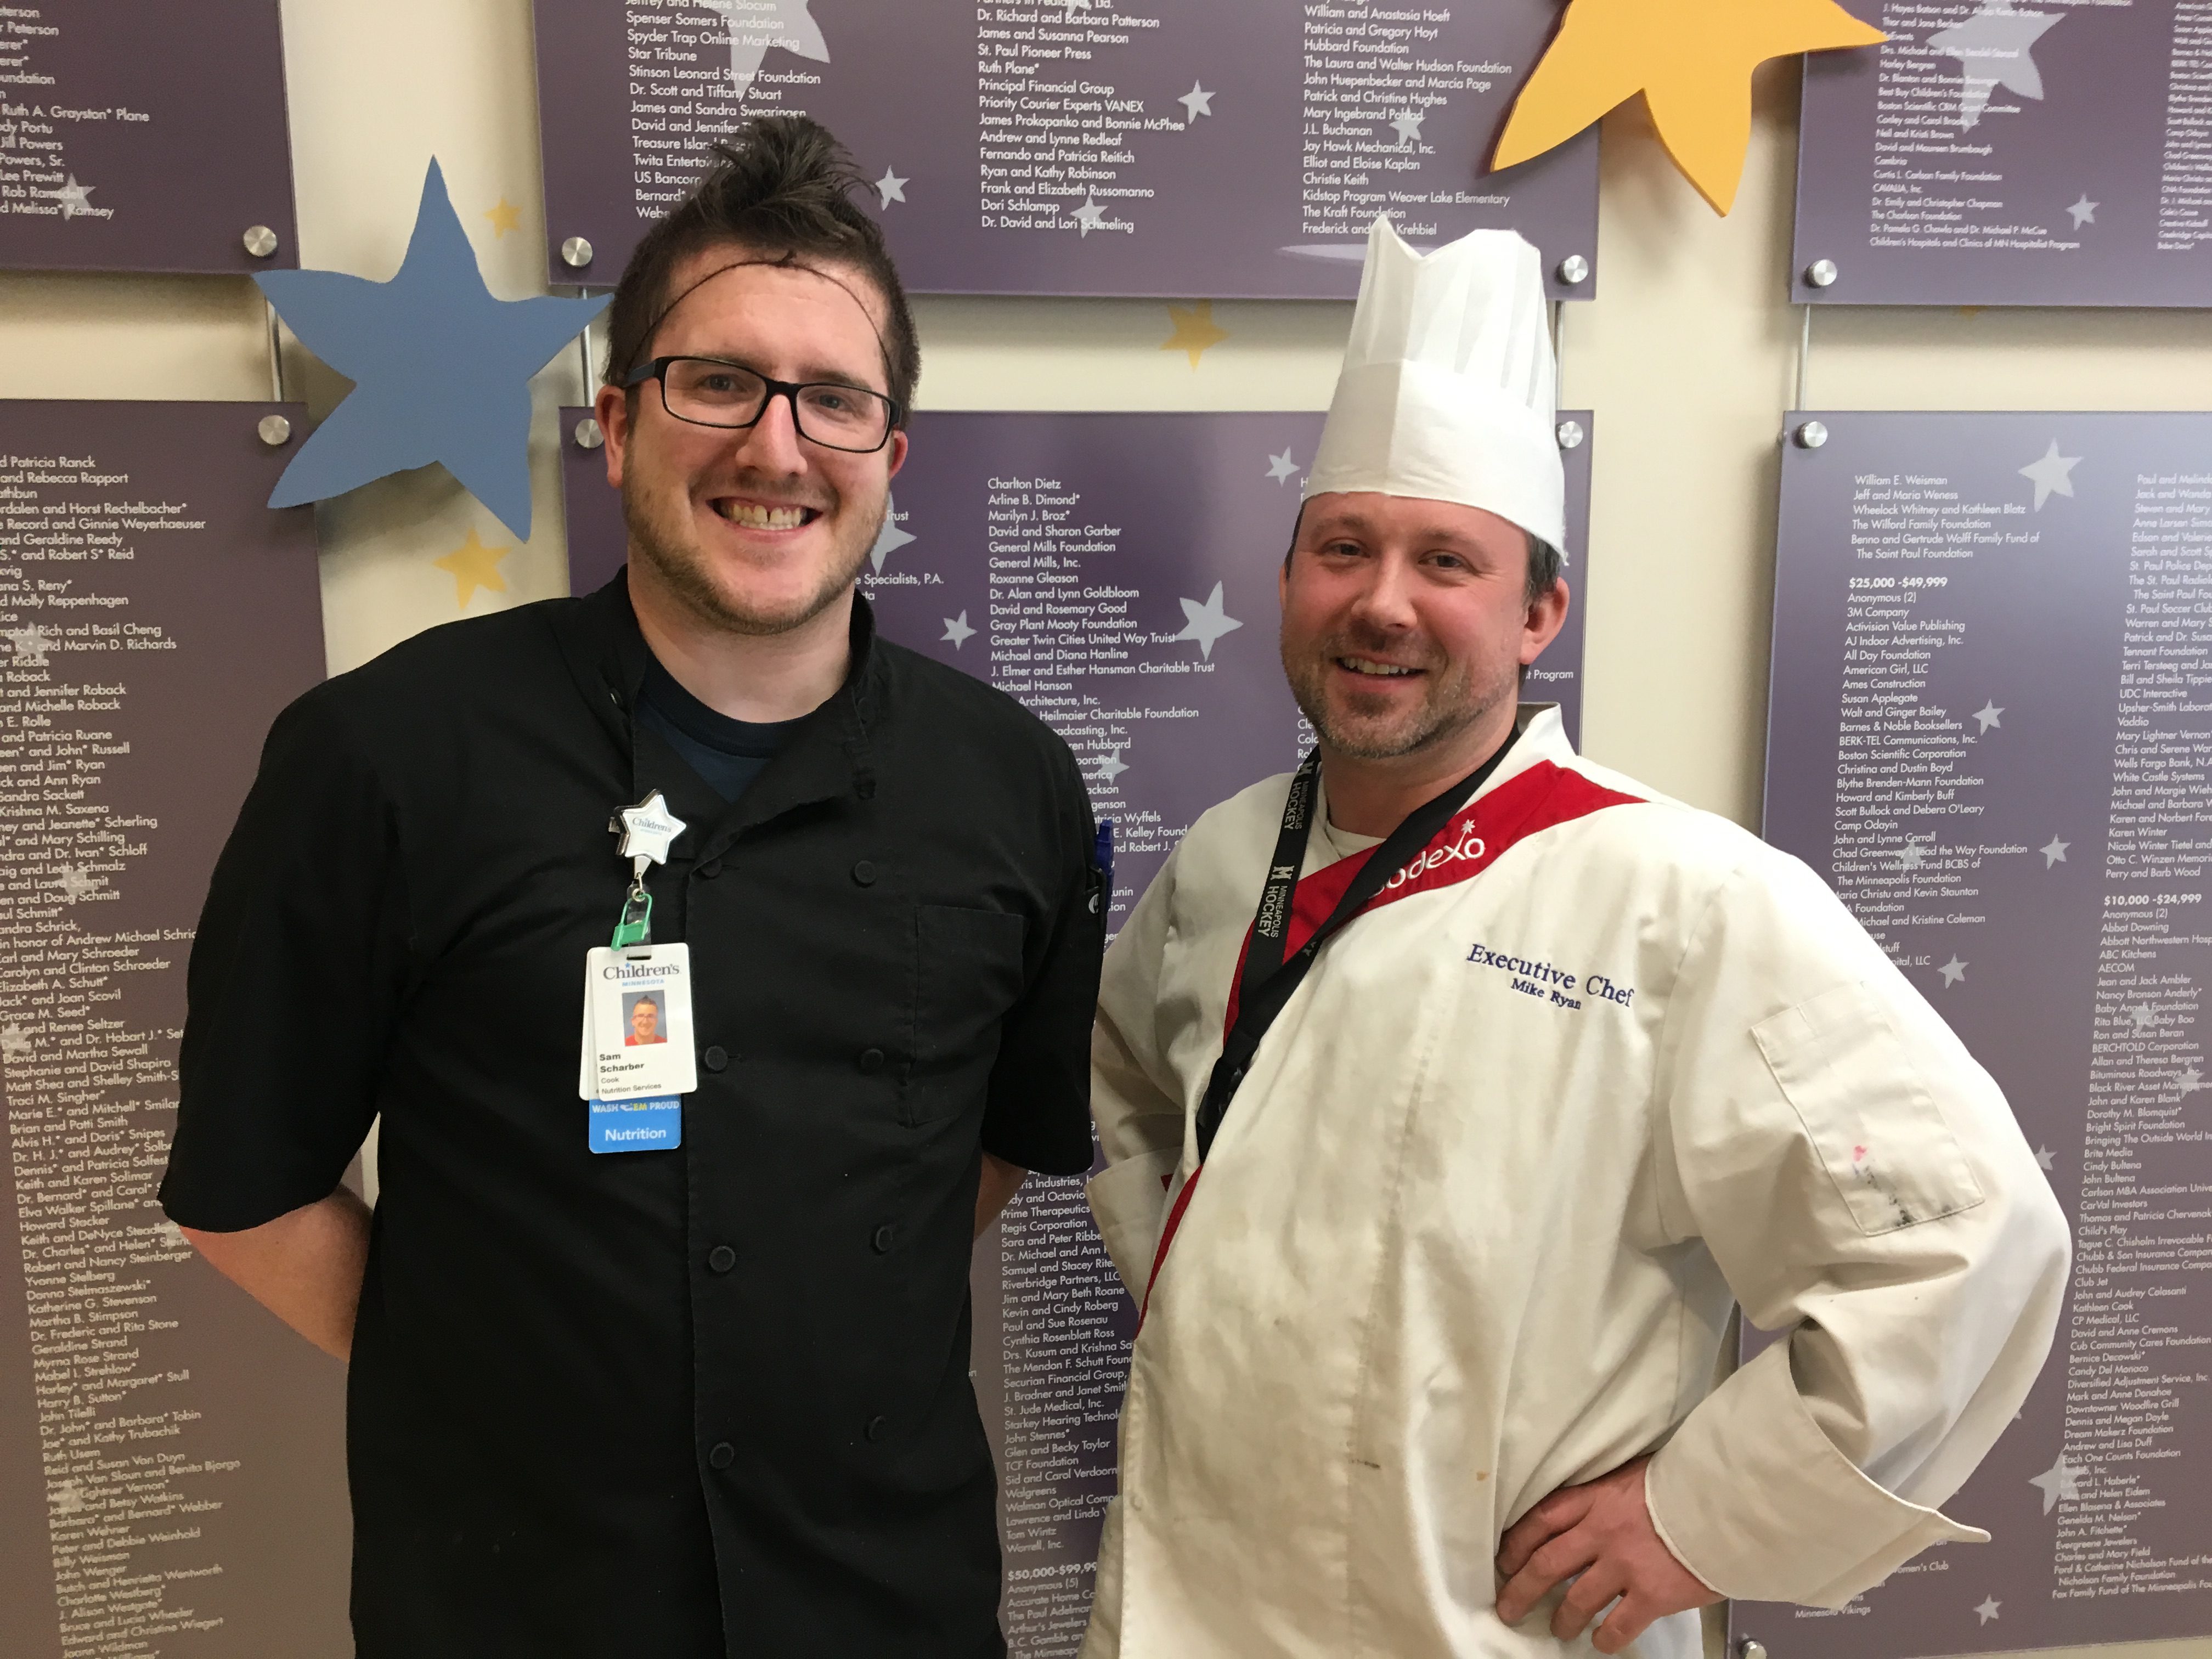 Michael Ryan, executive chef, and Sam Scharber, cook in Minneapolis